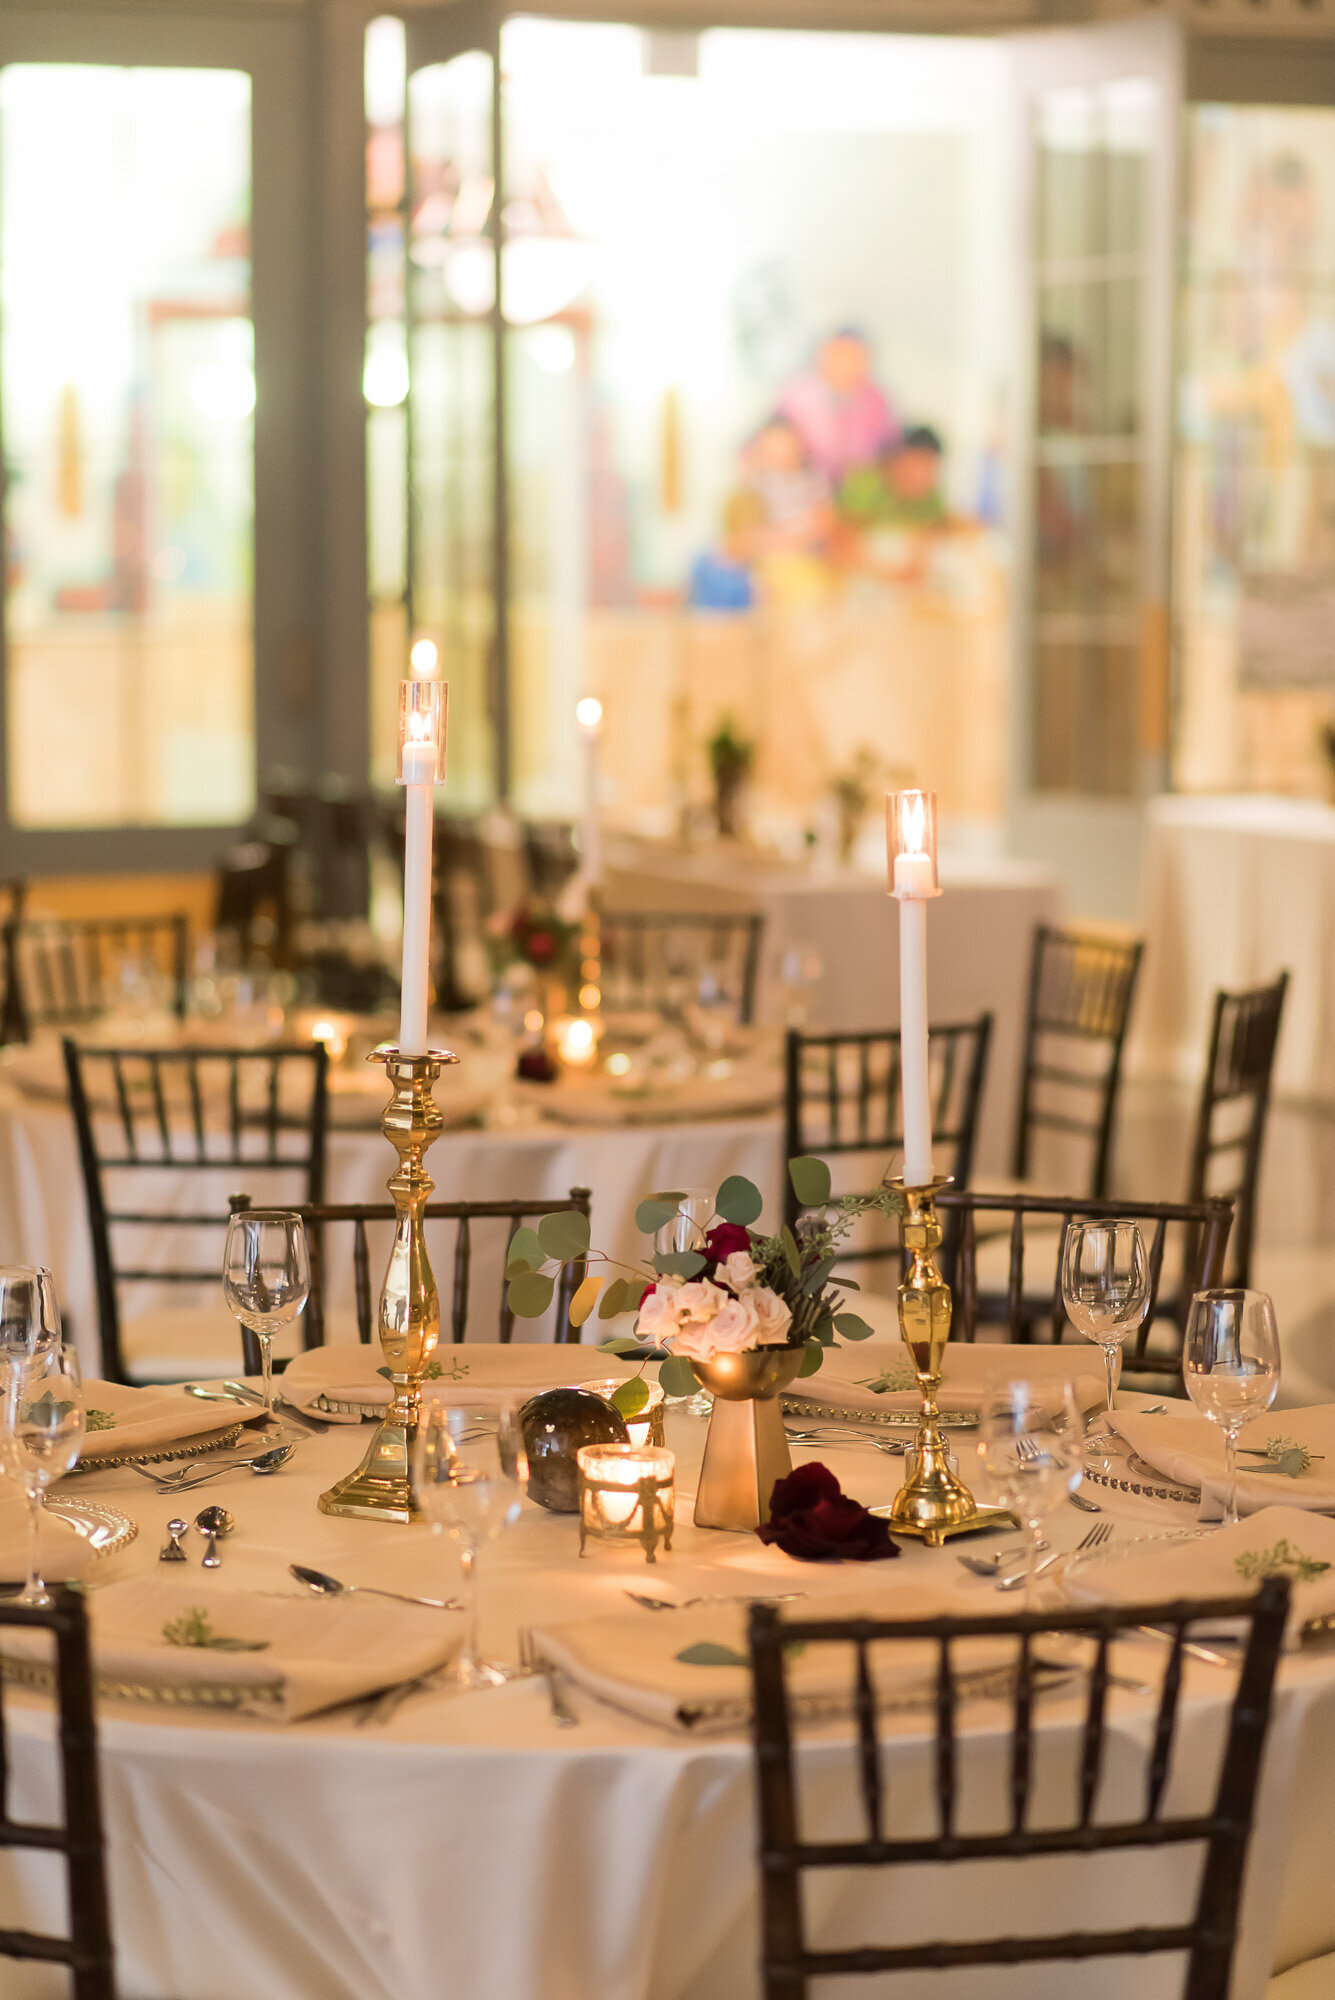 Wedding reception table with chairs